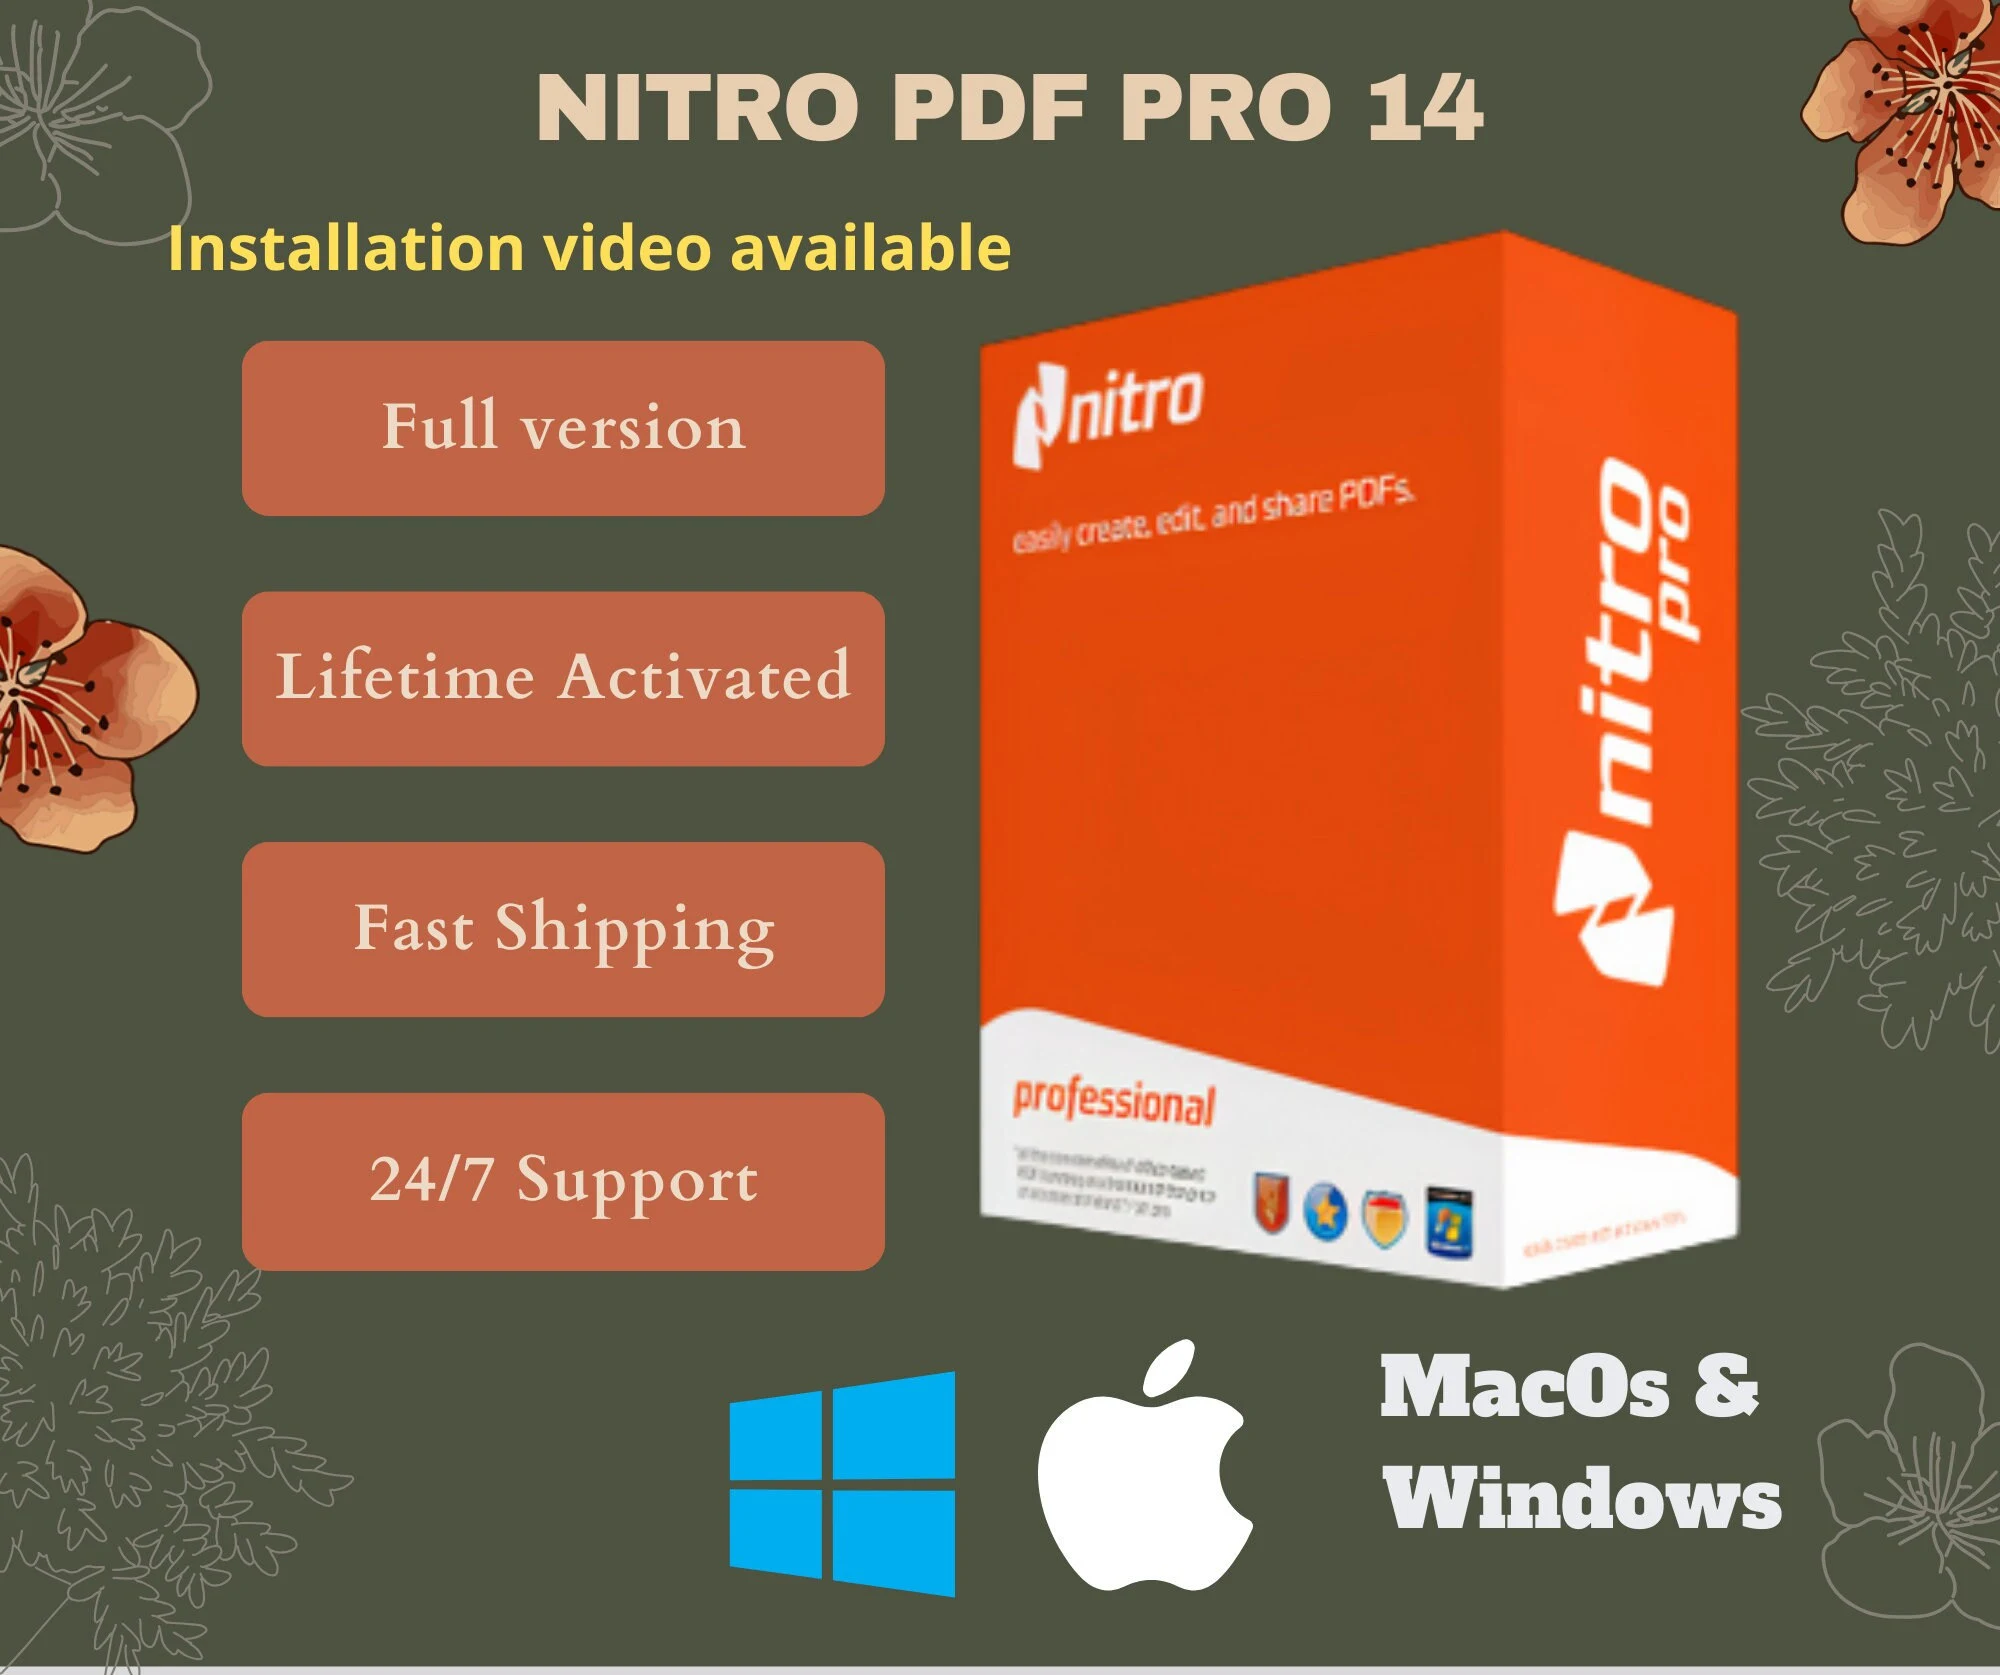 Nitro Pdf Pro - Latest Version 14.0.1 With All Features